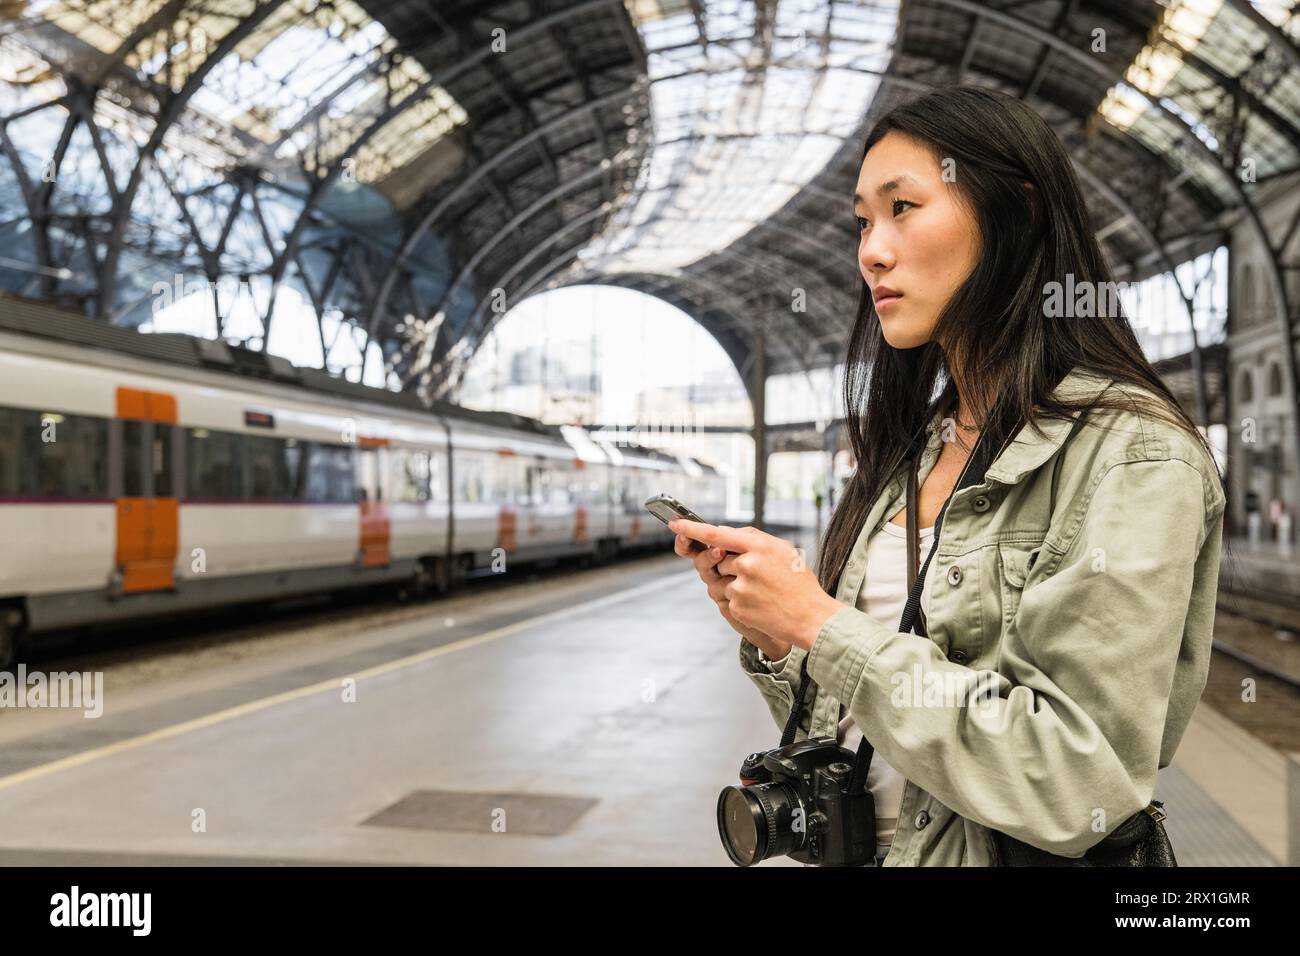 Young female traveler checking her phone in train station. Stock Photo